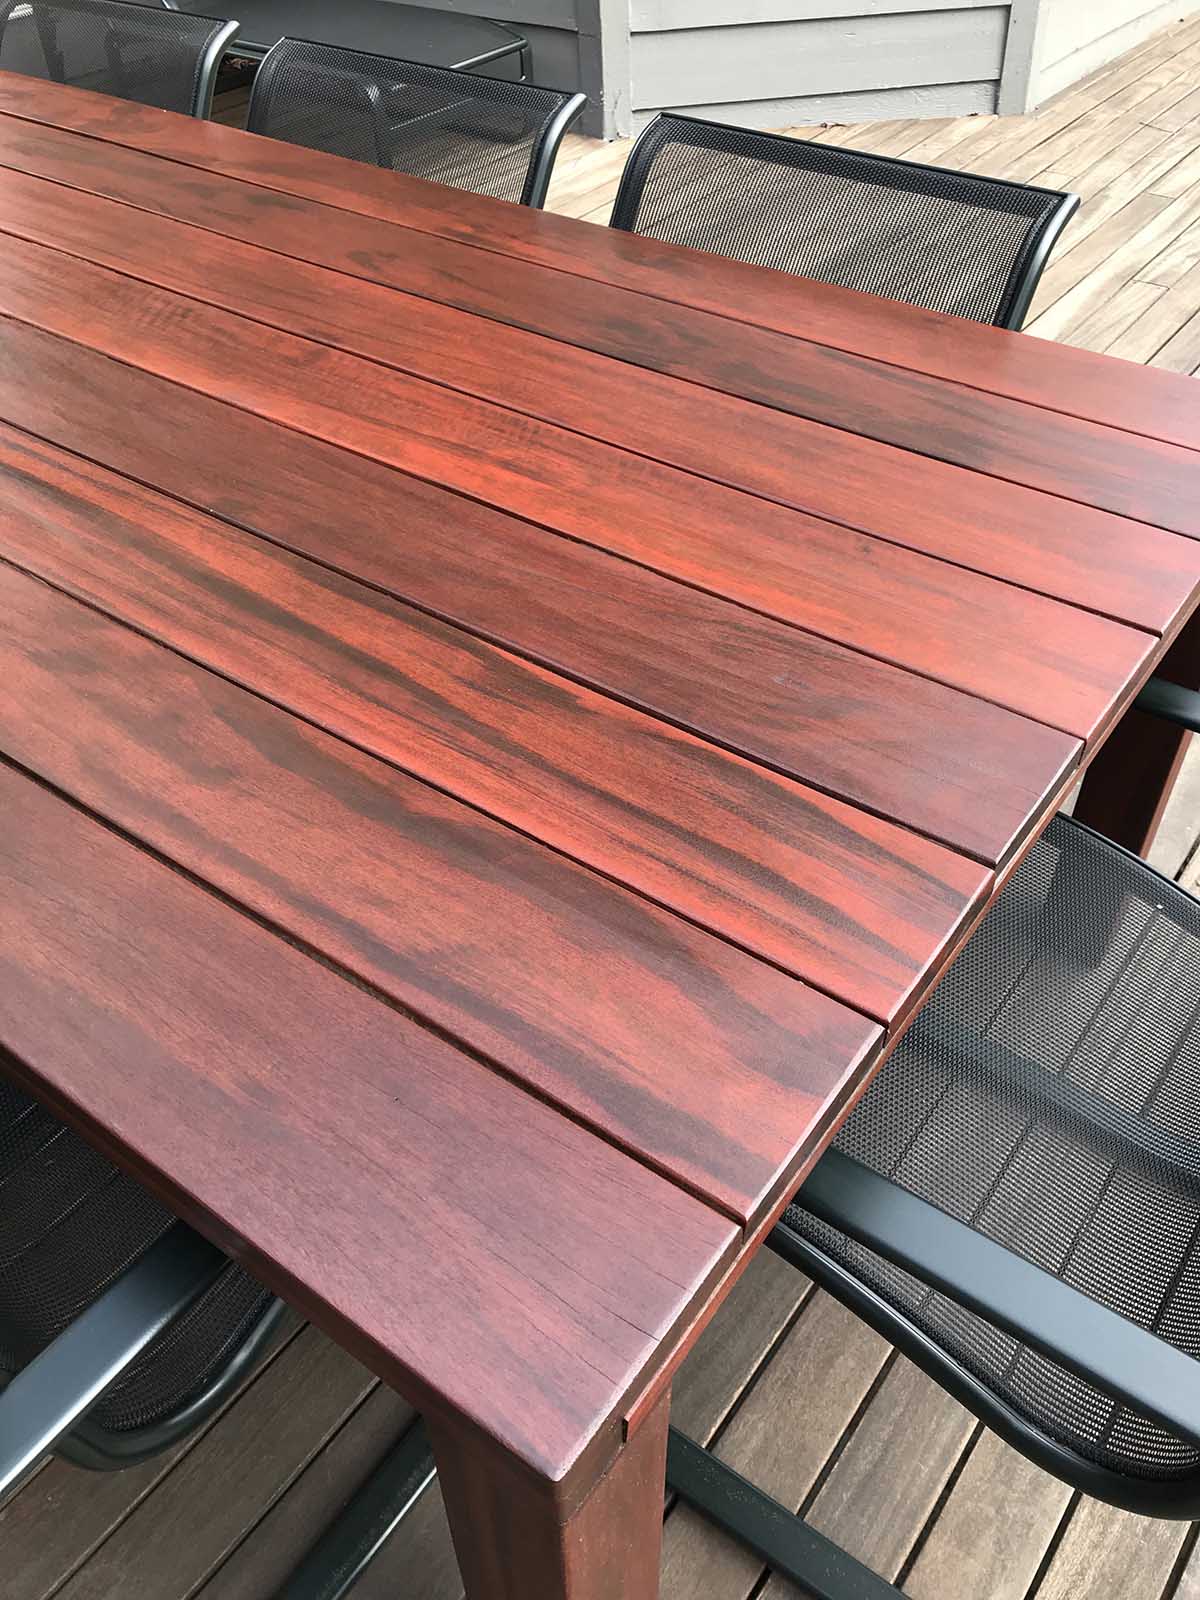 Tigerwood table -Fresh after wipe on coat. No cleaning or prep, just wipe on and soak in.